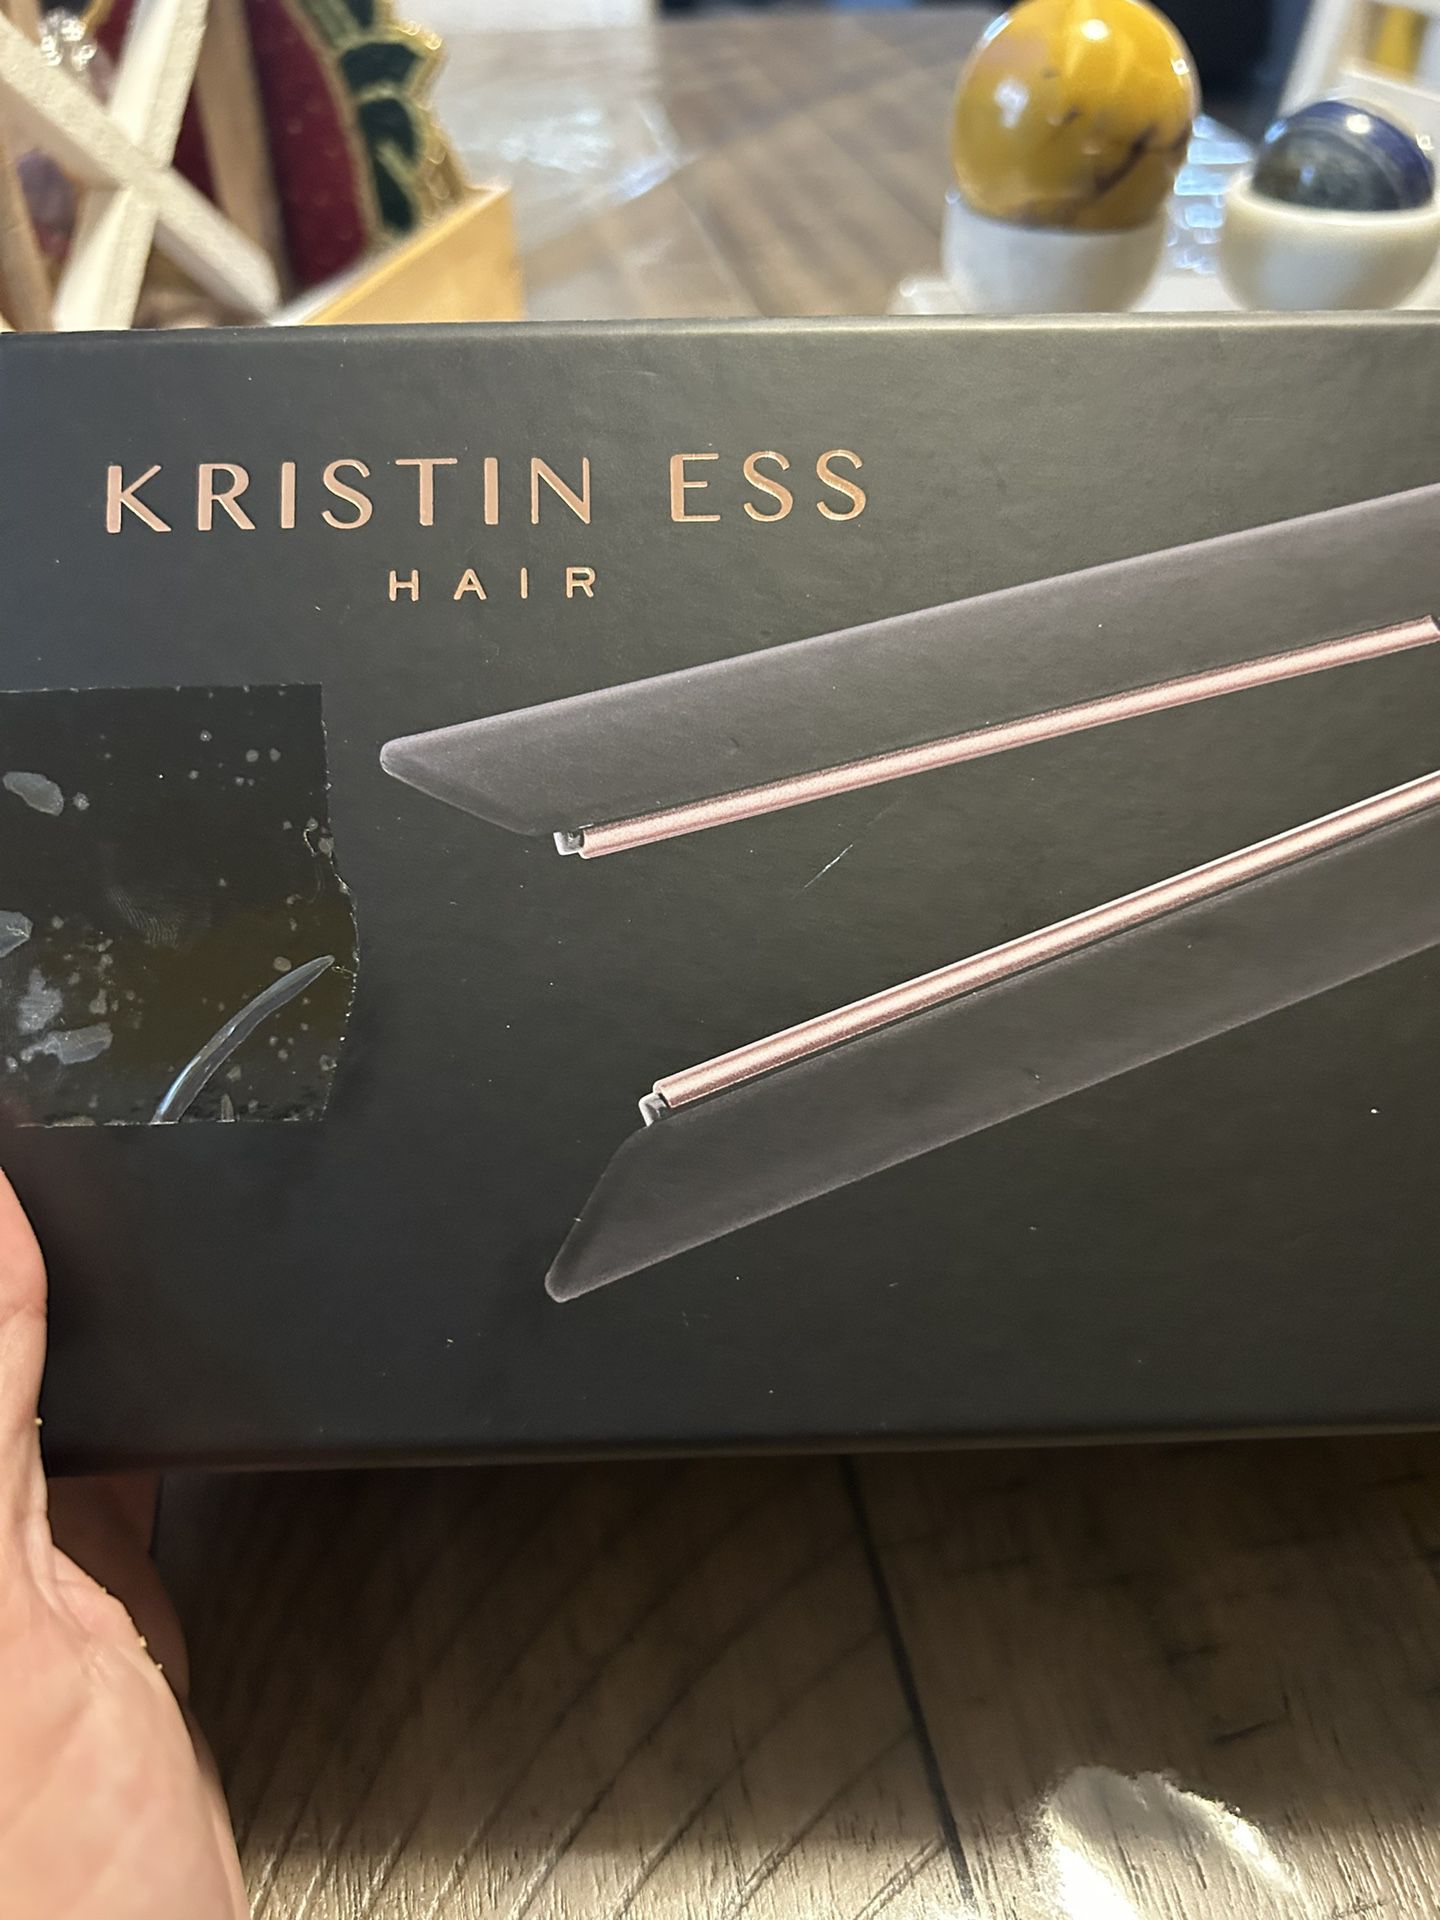 Kristin Ess Hair 3-In-One Ceramic Flat Iron Hair Straightener for Straightening, Waving + Curling, Soft Heat Technology for Smoothing + Frizz Control,